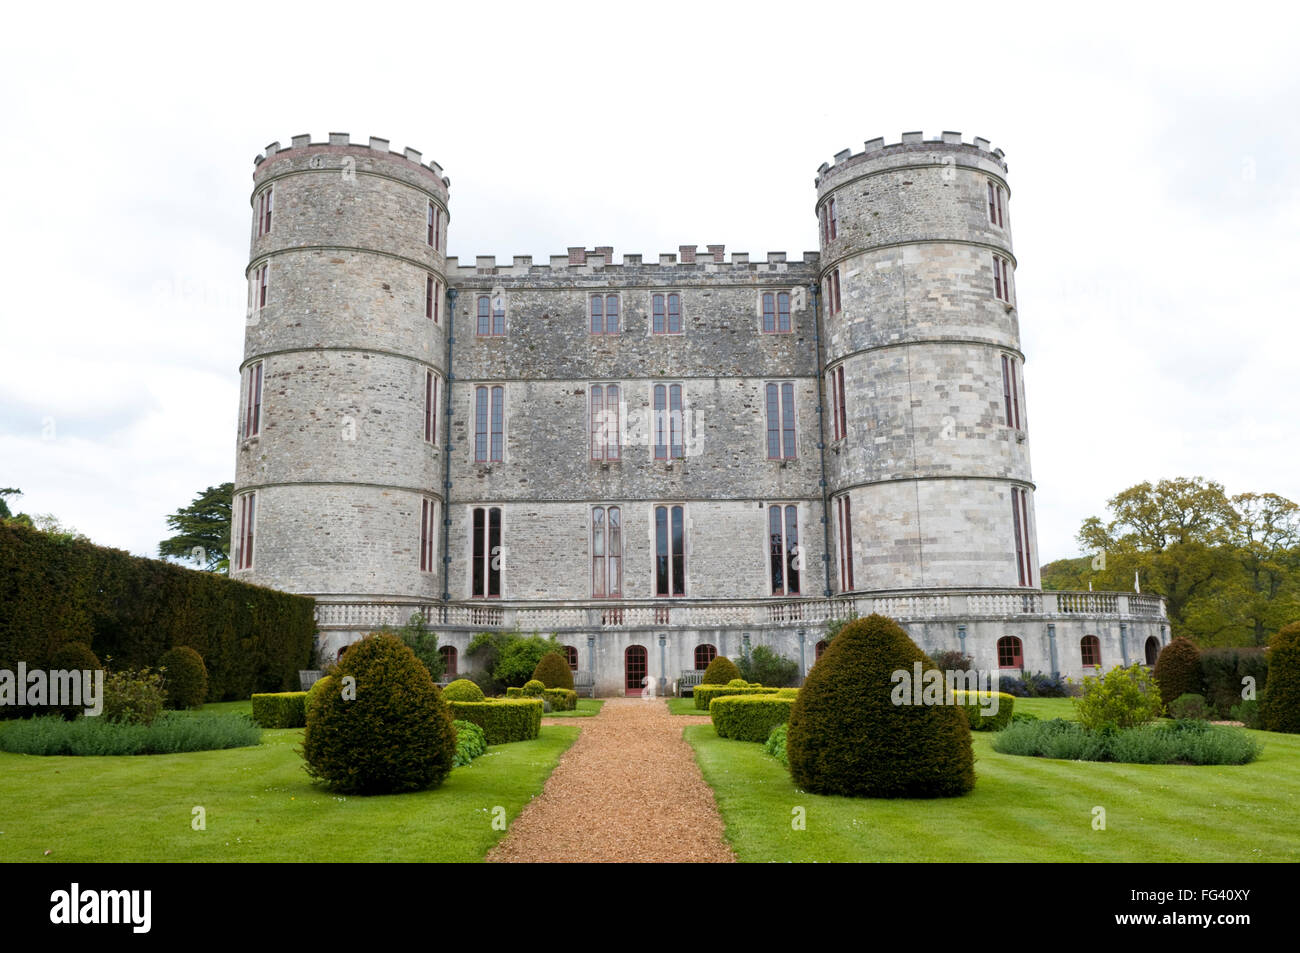 The 17th century Lulworth Castle in Dorset, England, UK, originally built as a hunting lodge Stock Photo